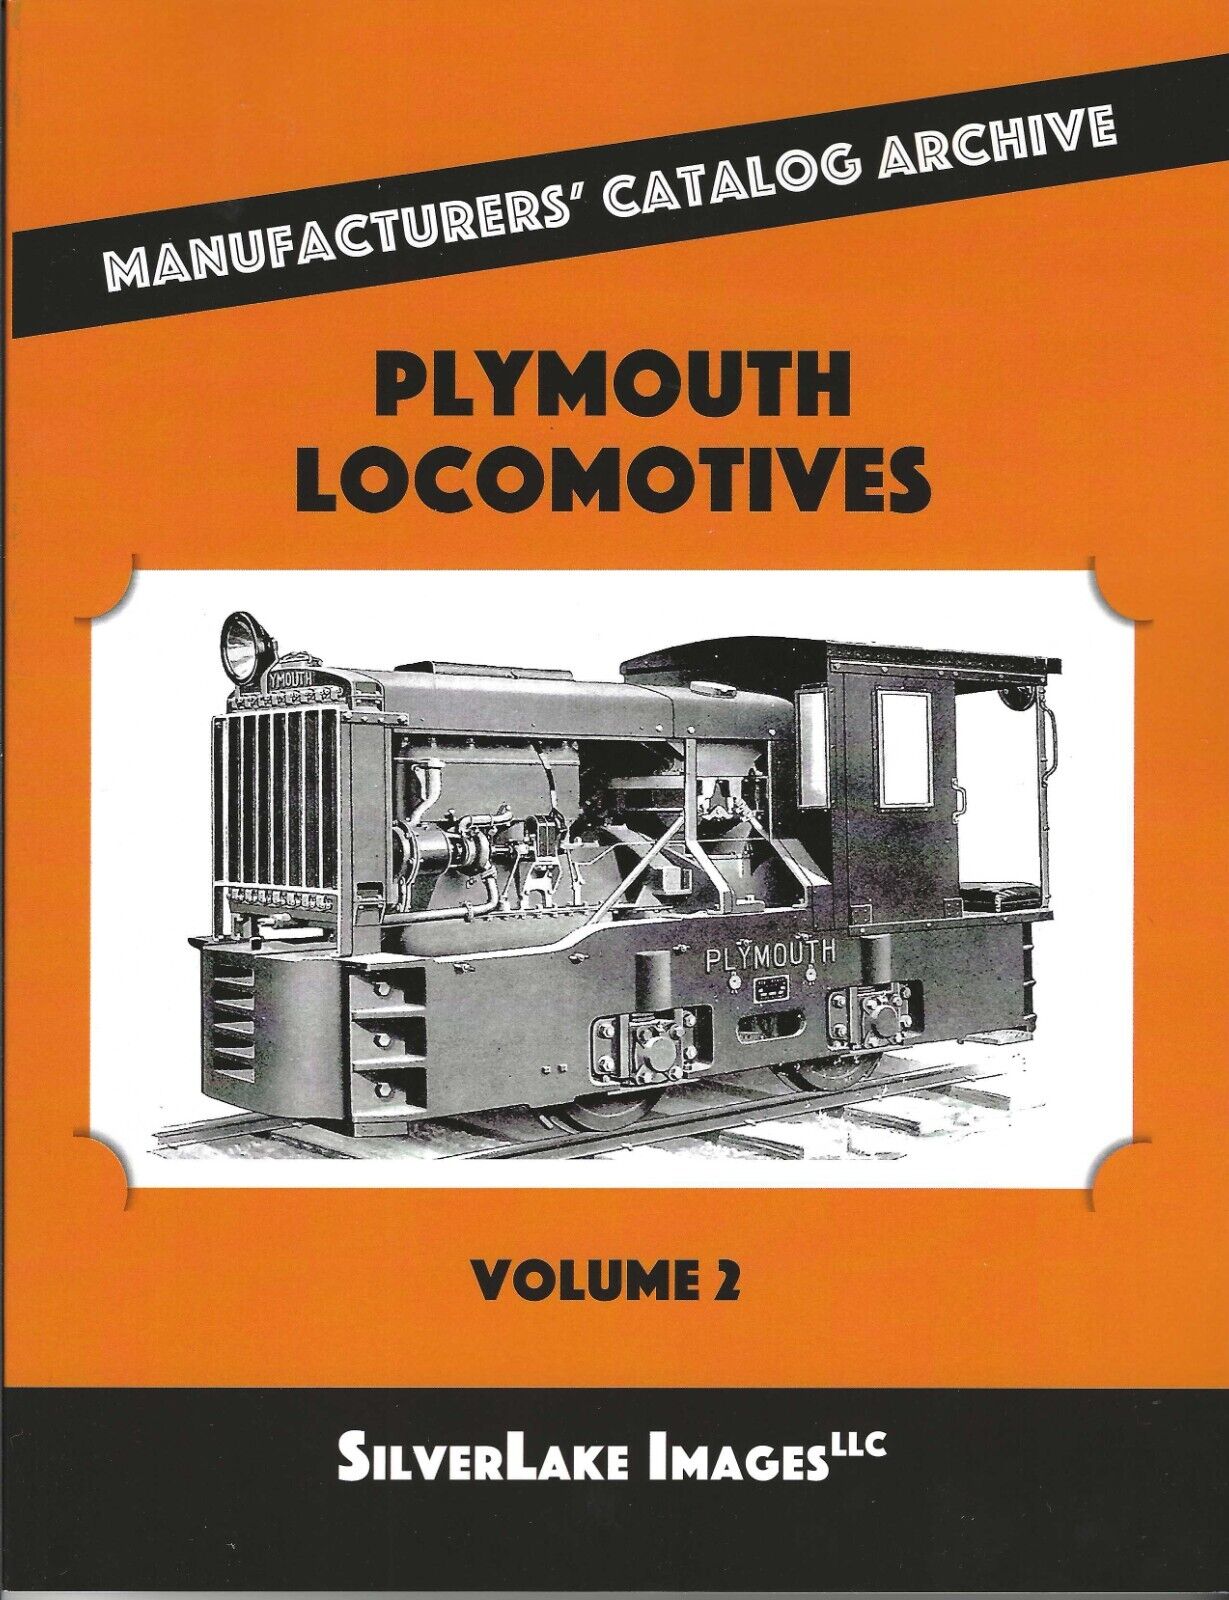 PLYMOUTH LOCOMOTIVES, Vol. 2 from Manufacturers' Catalog Archive  BRAND NEW BOOK